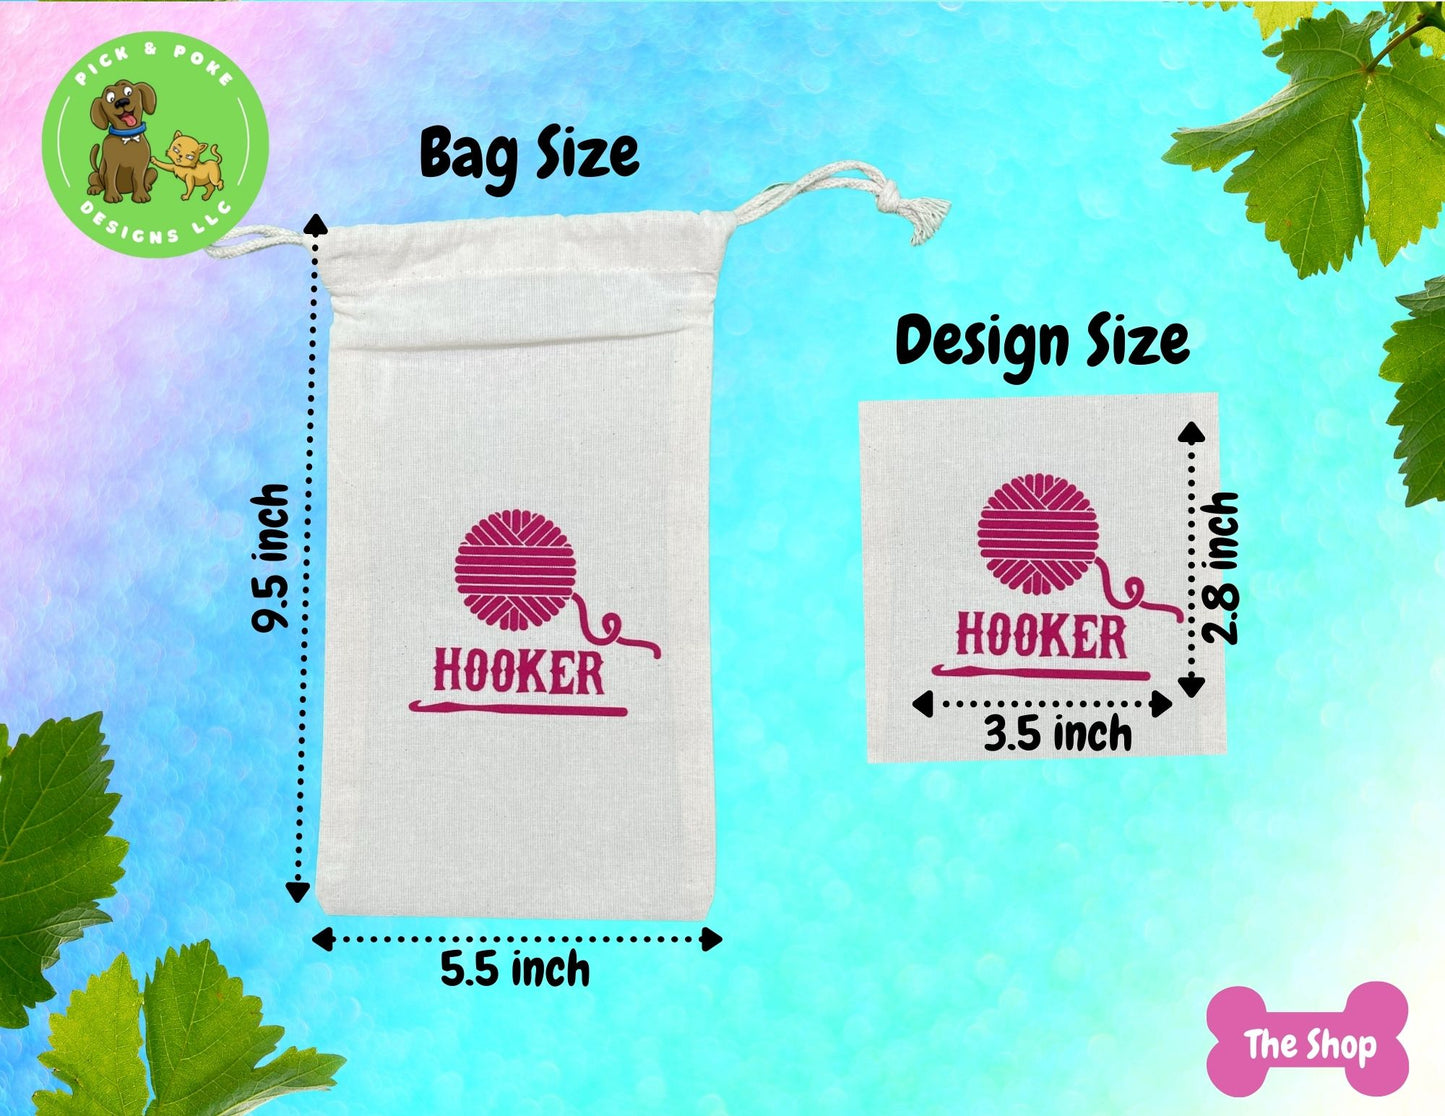 Crochet Hooker Drawstring Canvas Pouch (Custom Made) | Store crochet supplies or use as a gift bag for friends and family who craft!